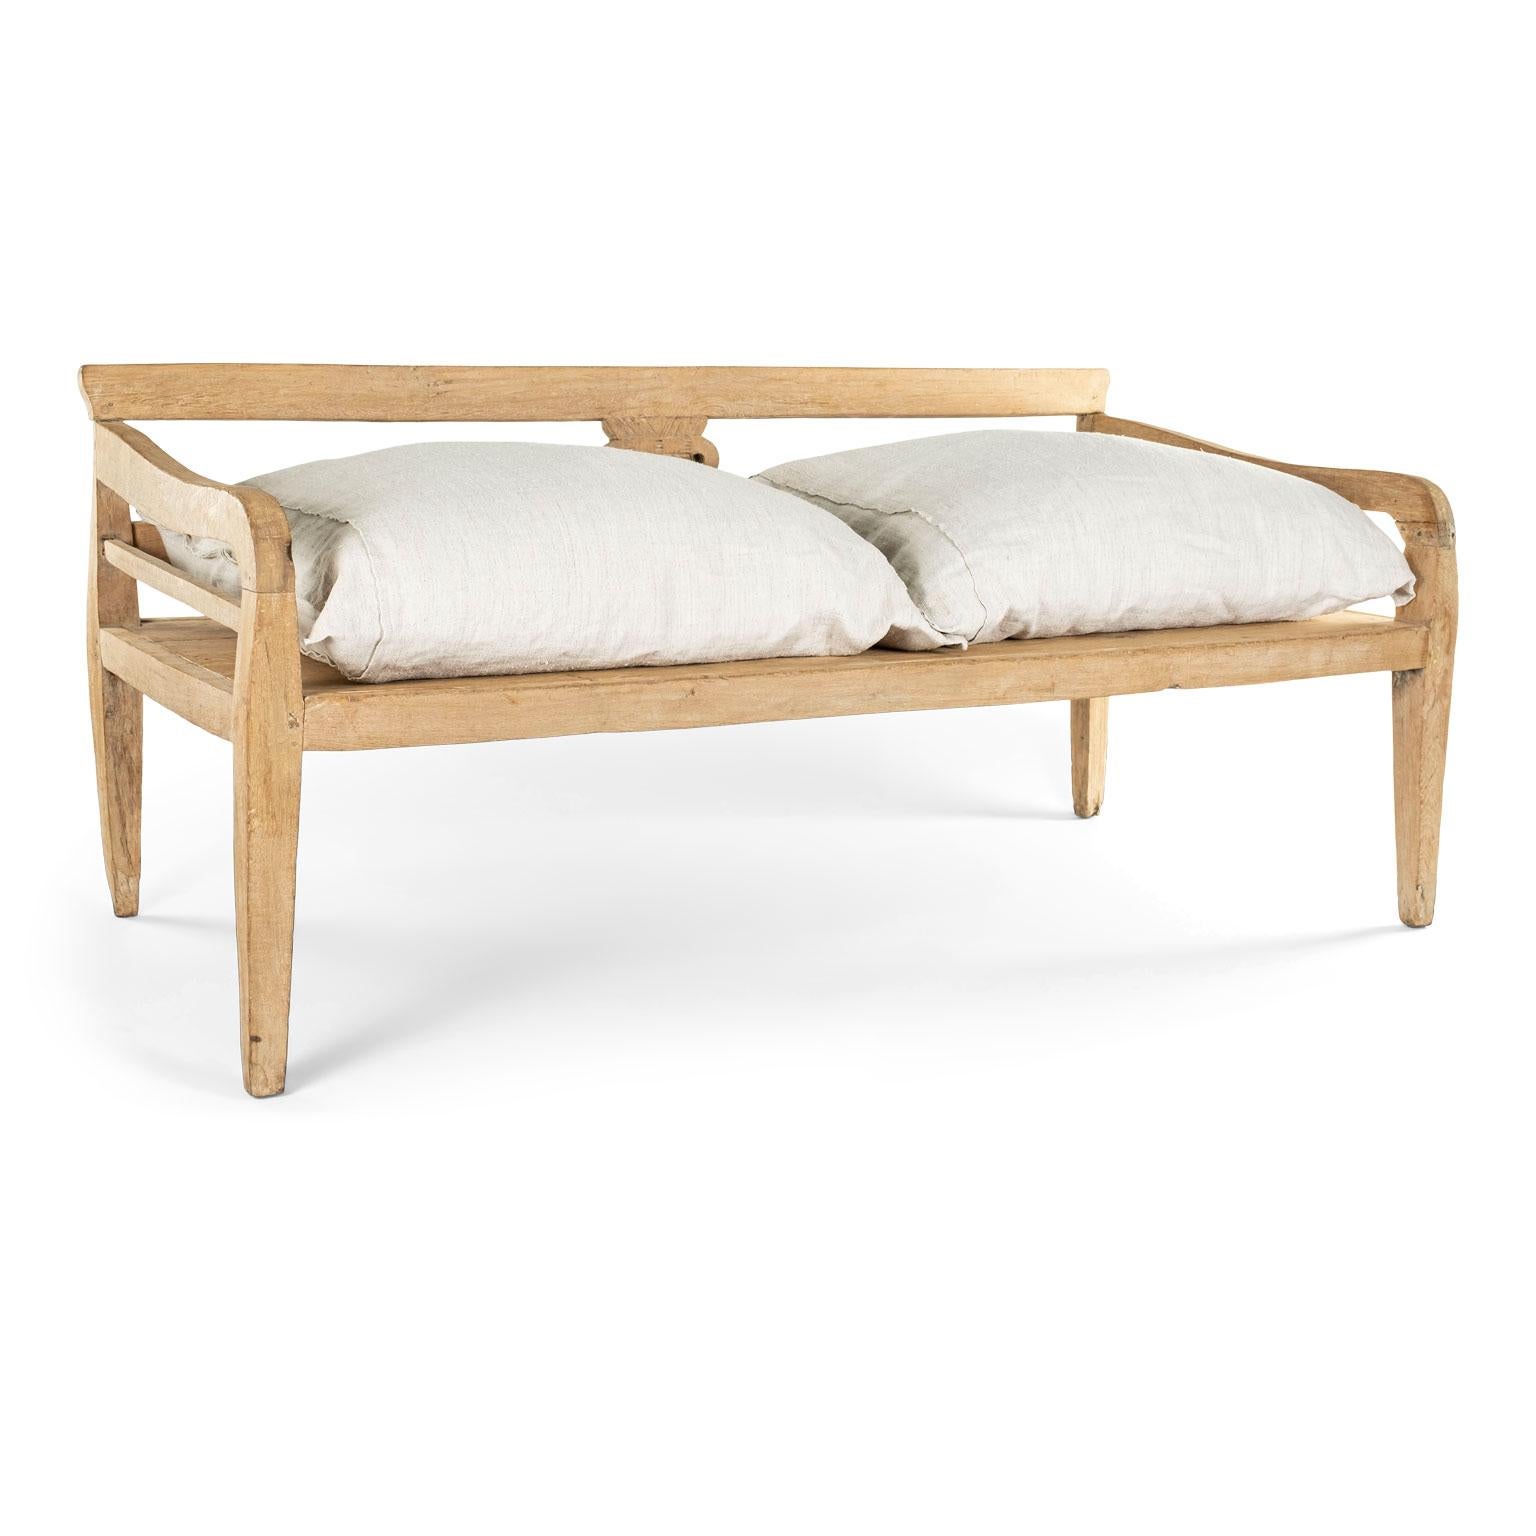 British Colonial Style Pine Daybed or Deep Bench 2